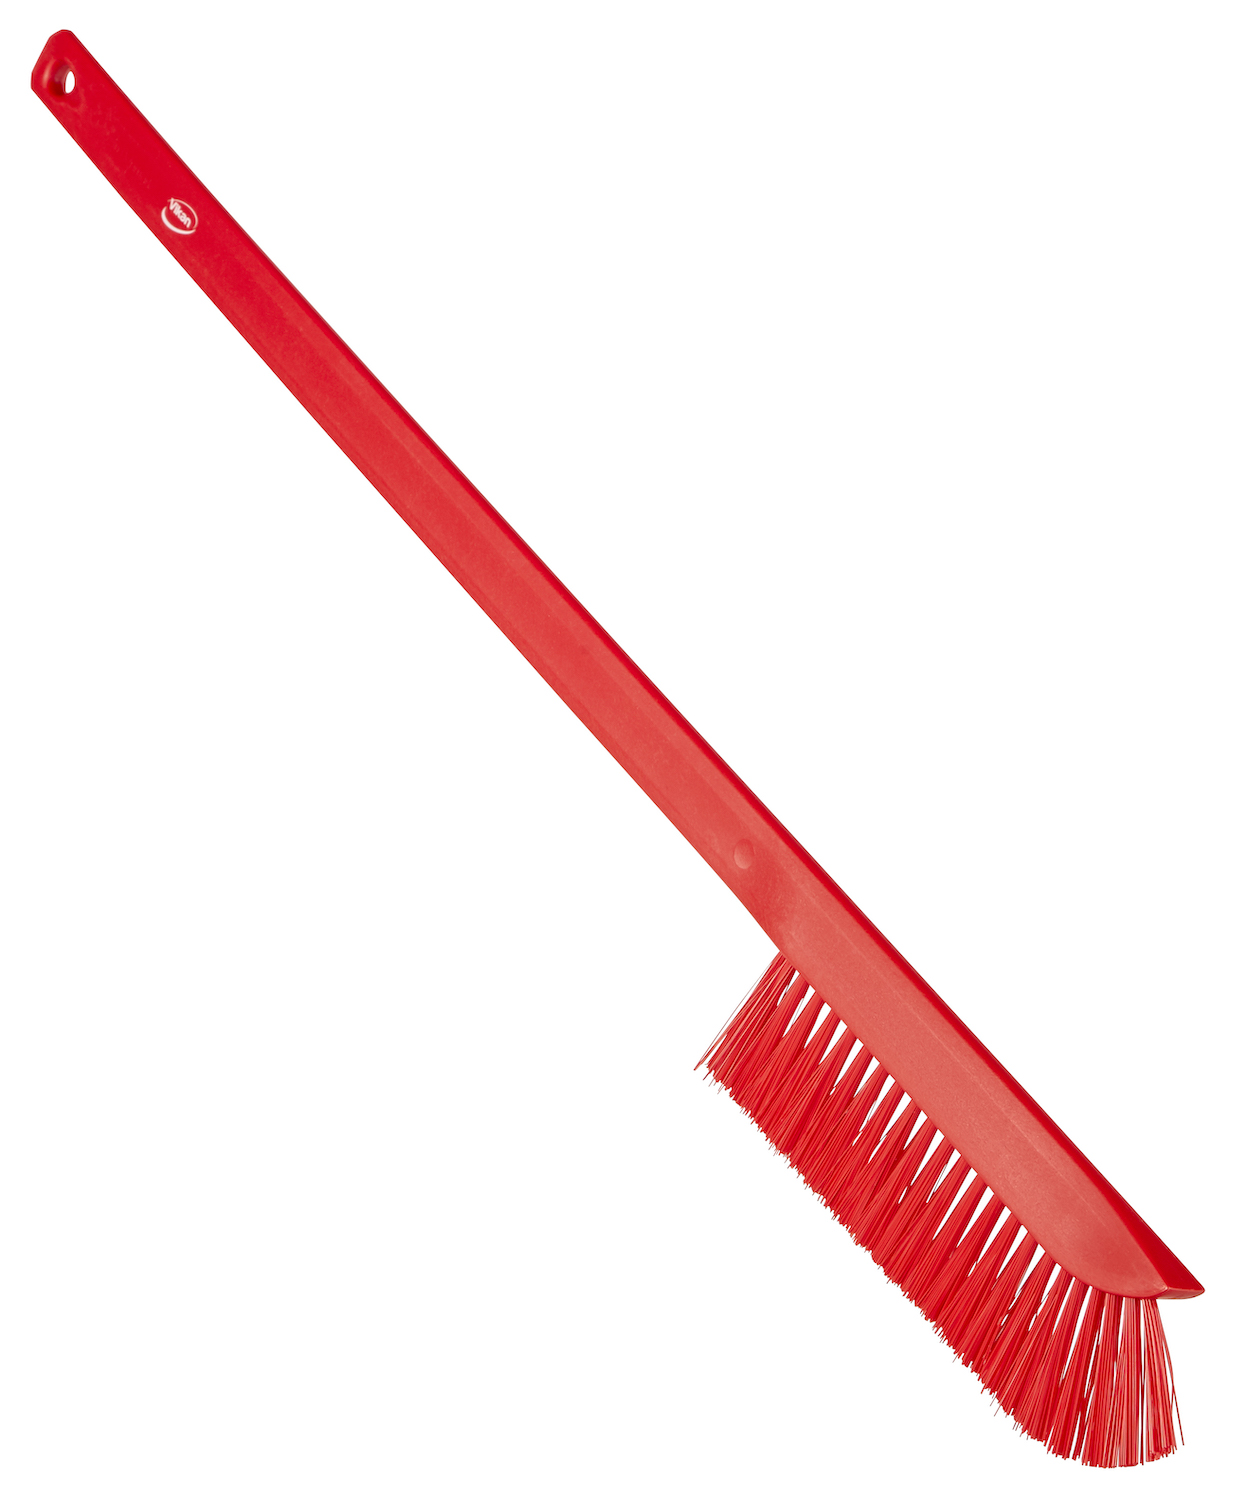 Ultra-Slim Cleaning Brush with Long Handle, 600 mm, Medium, Red